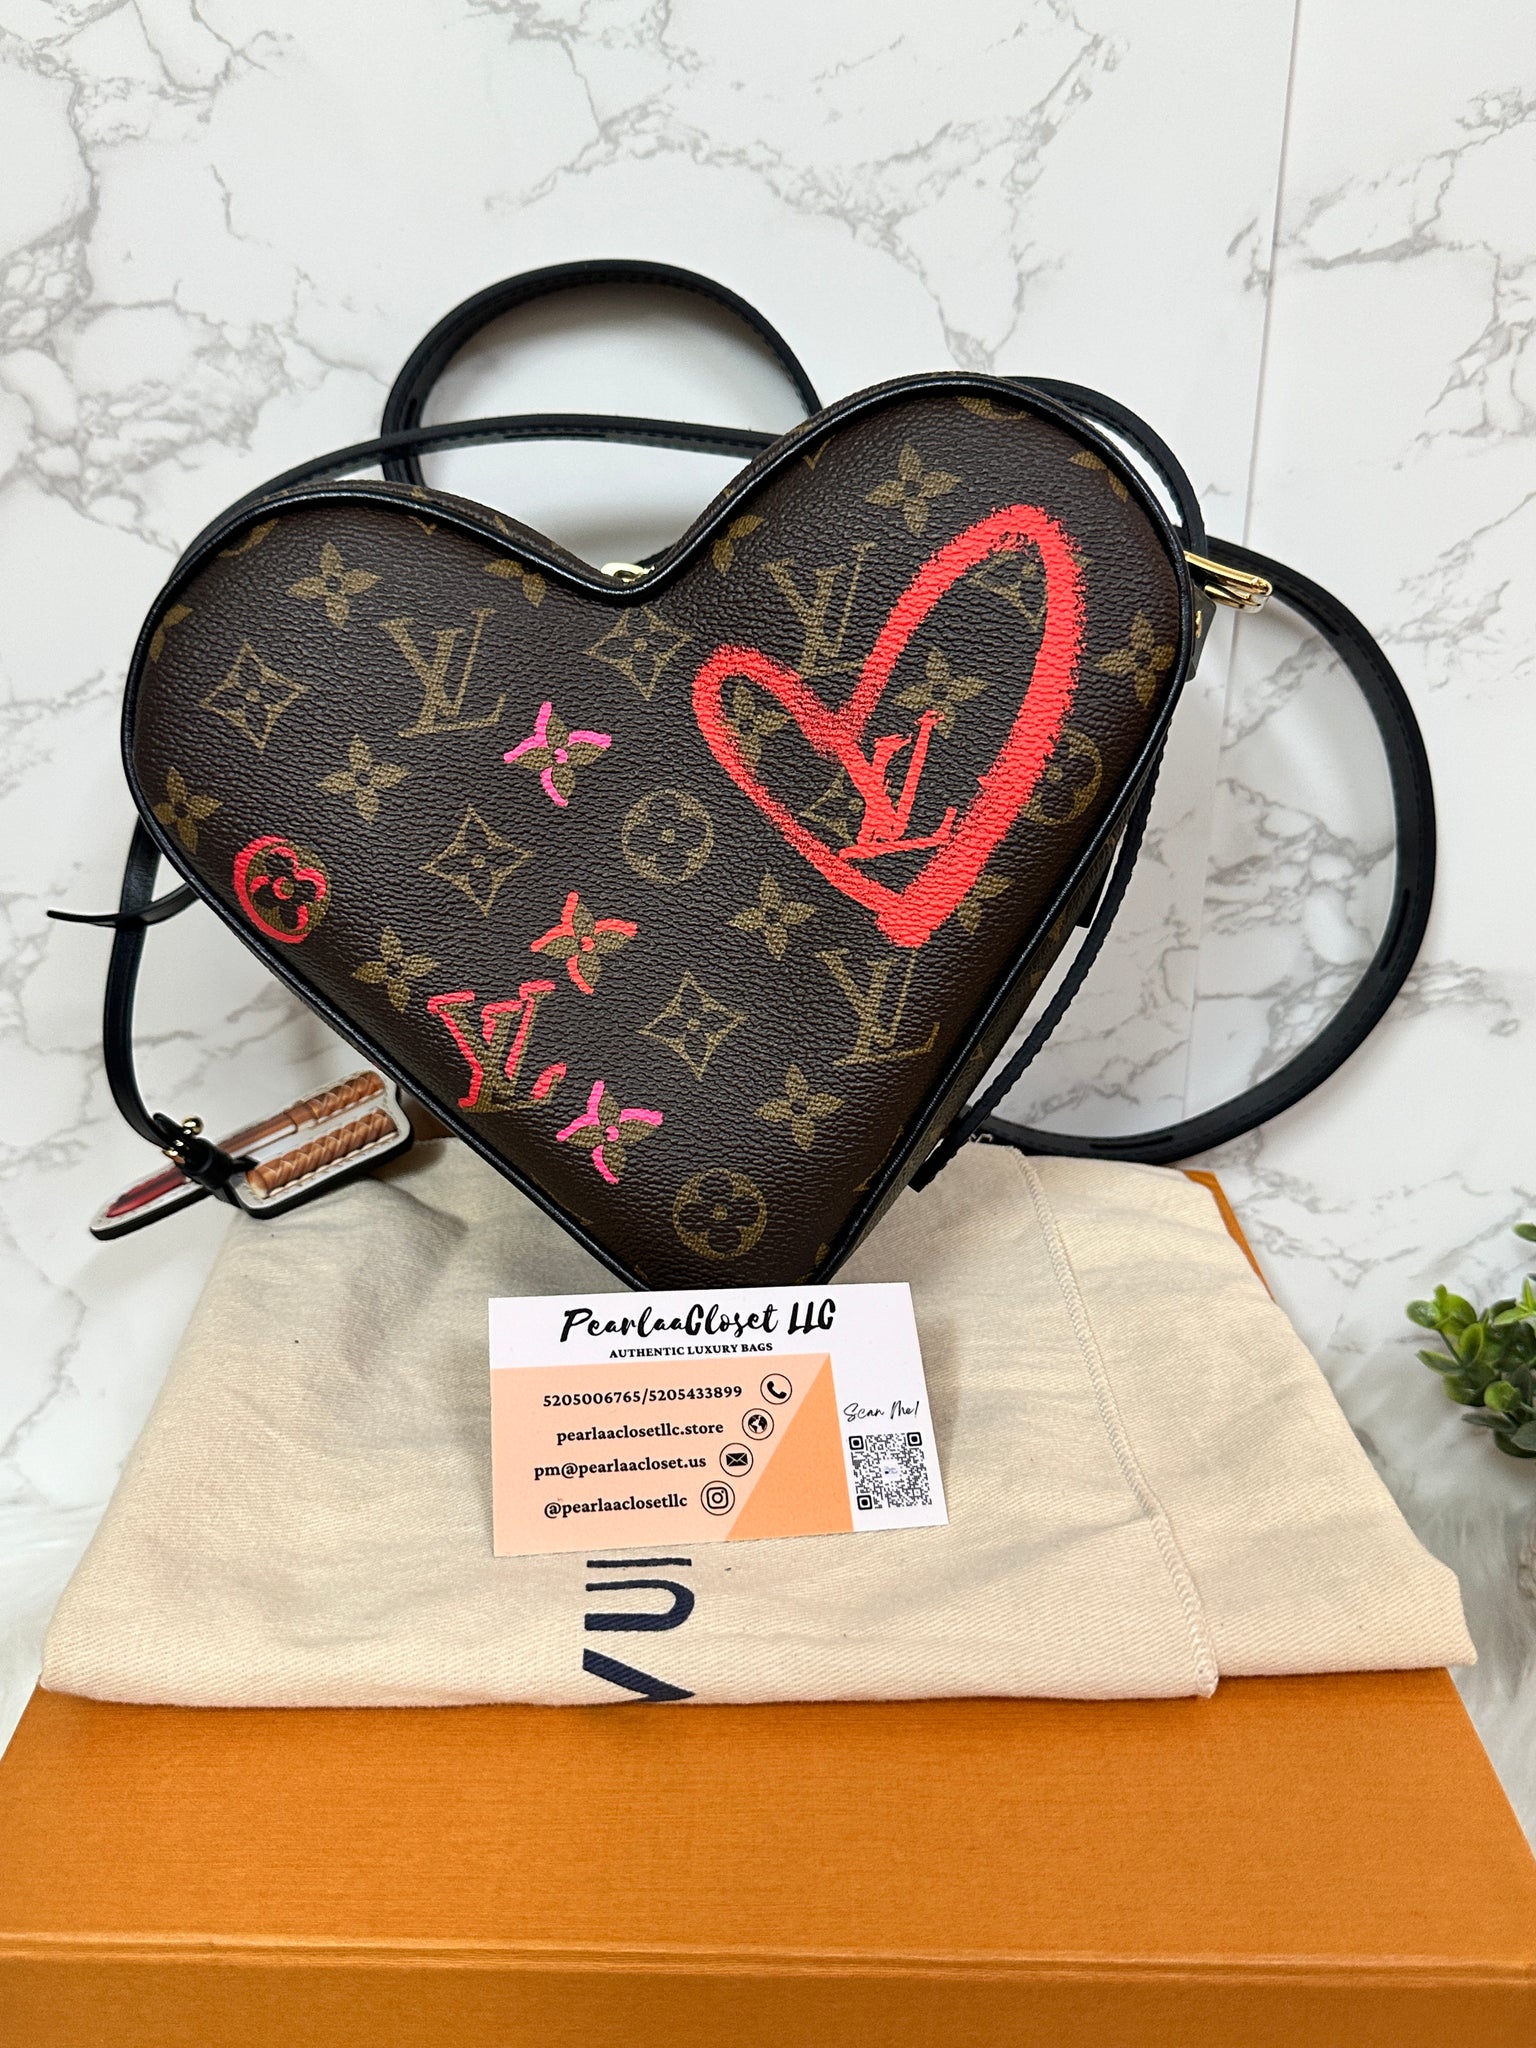 Limited Edition Louis Vuitton Fall In Love Sac Coeur in Monogram canvas❤️  New Condition ❤️ $4,300 * We are not affiliated with the brands…